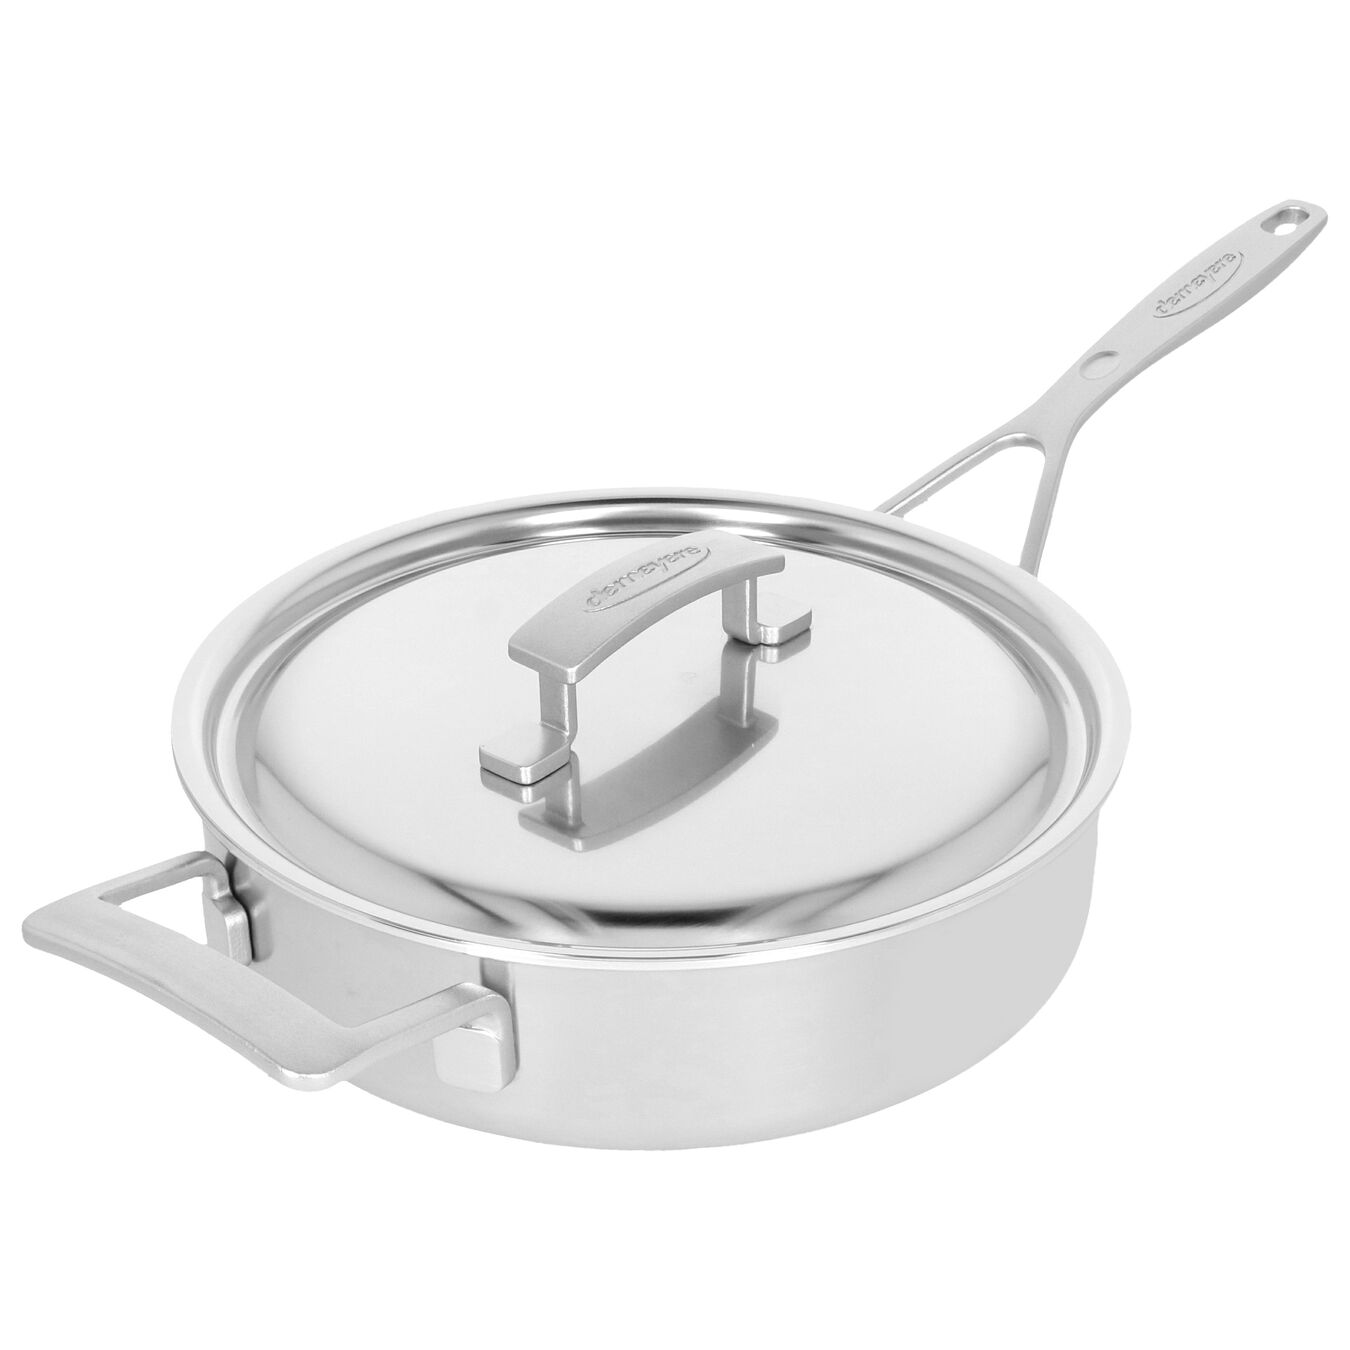 3 qt Sauté Pan with Helper Handle and Lid, 18/10 Stainless Steel ,,large 3